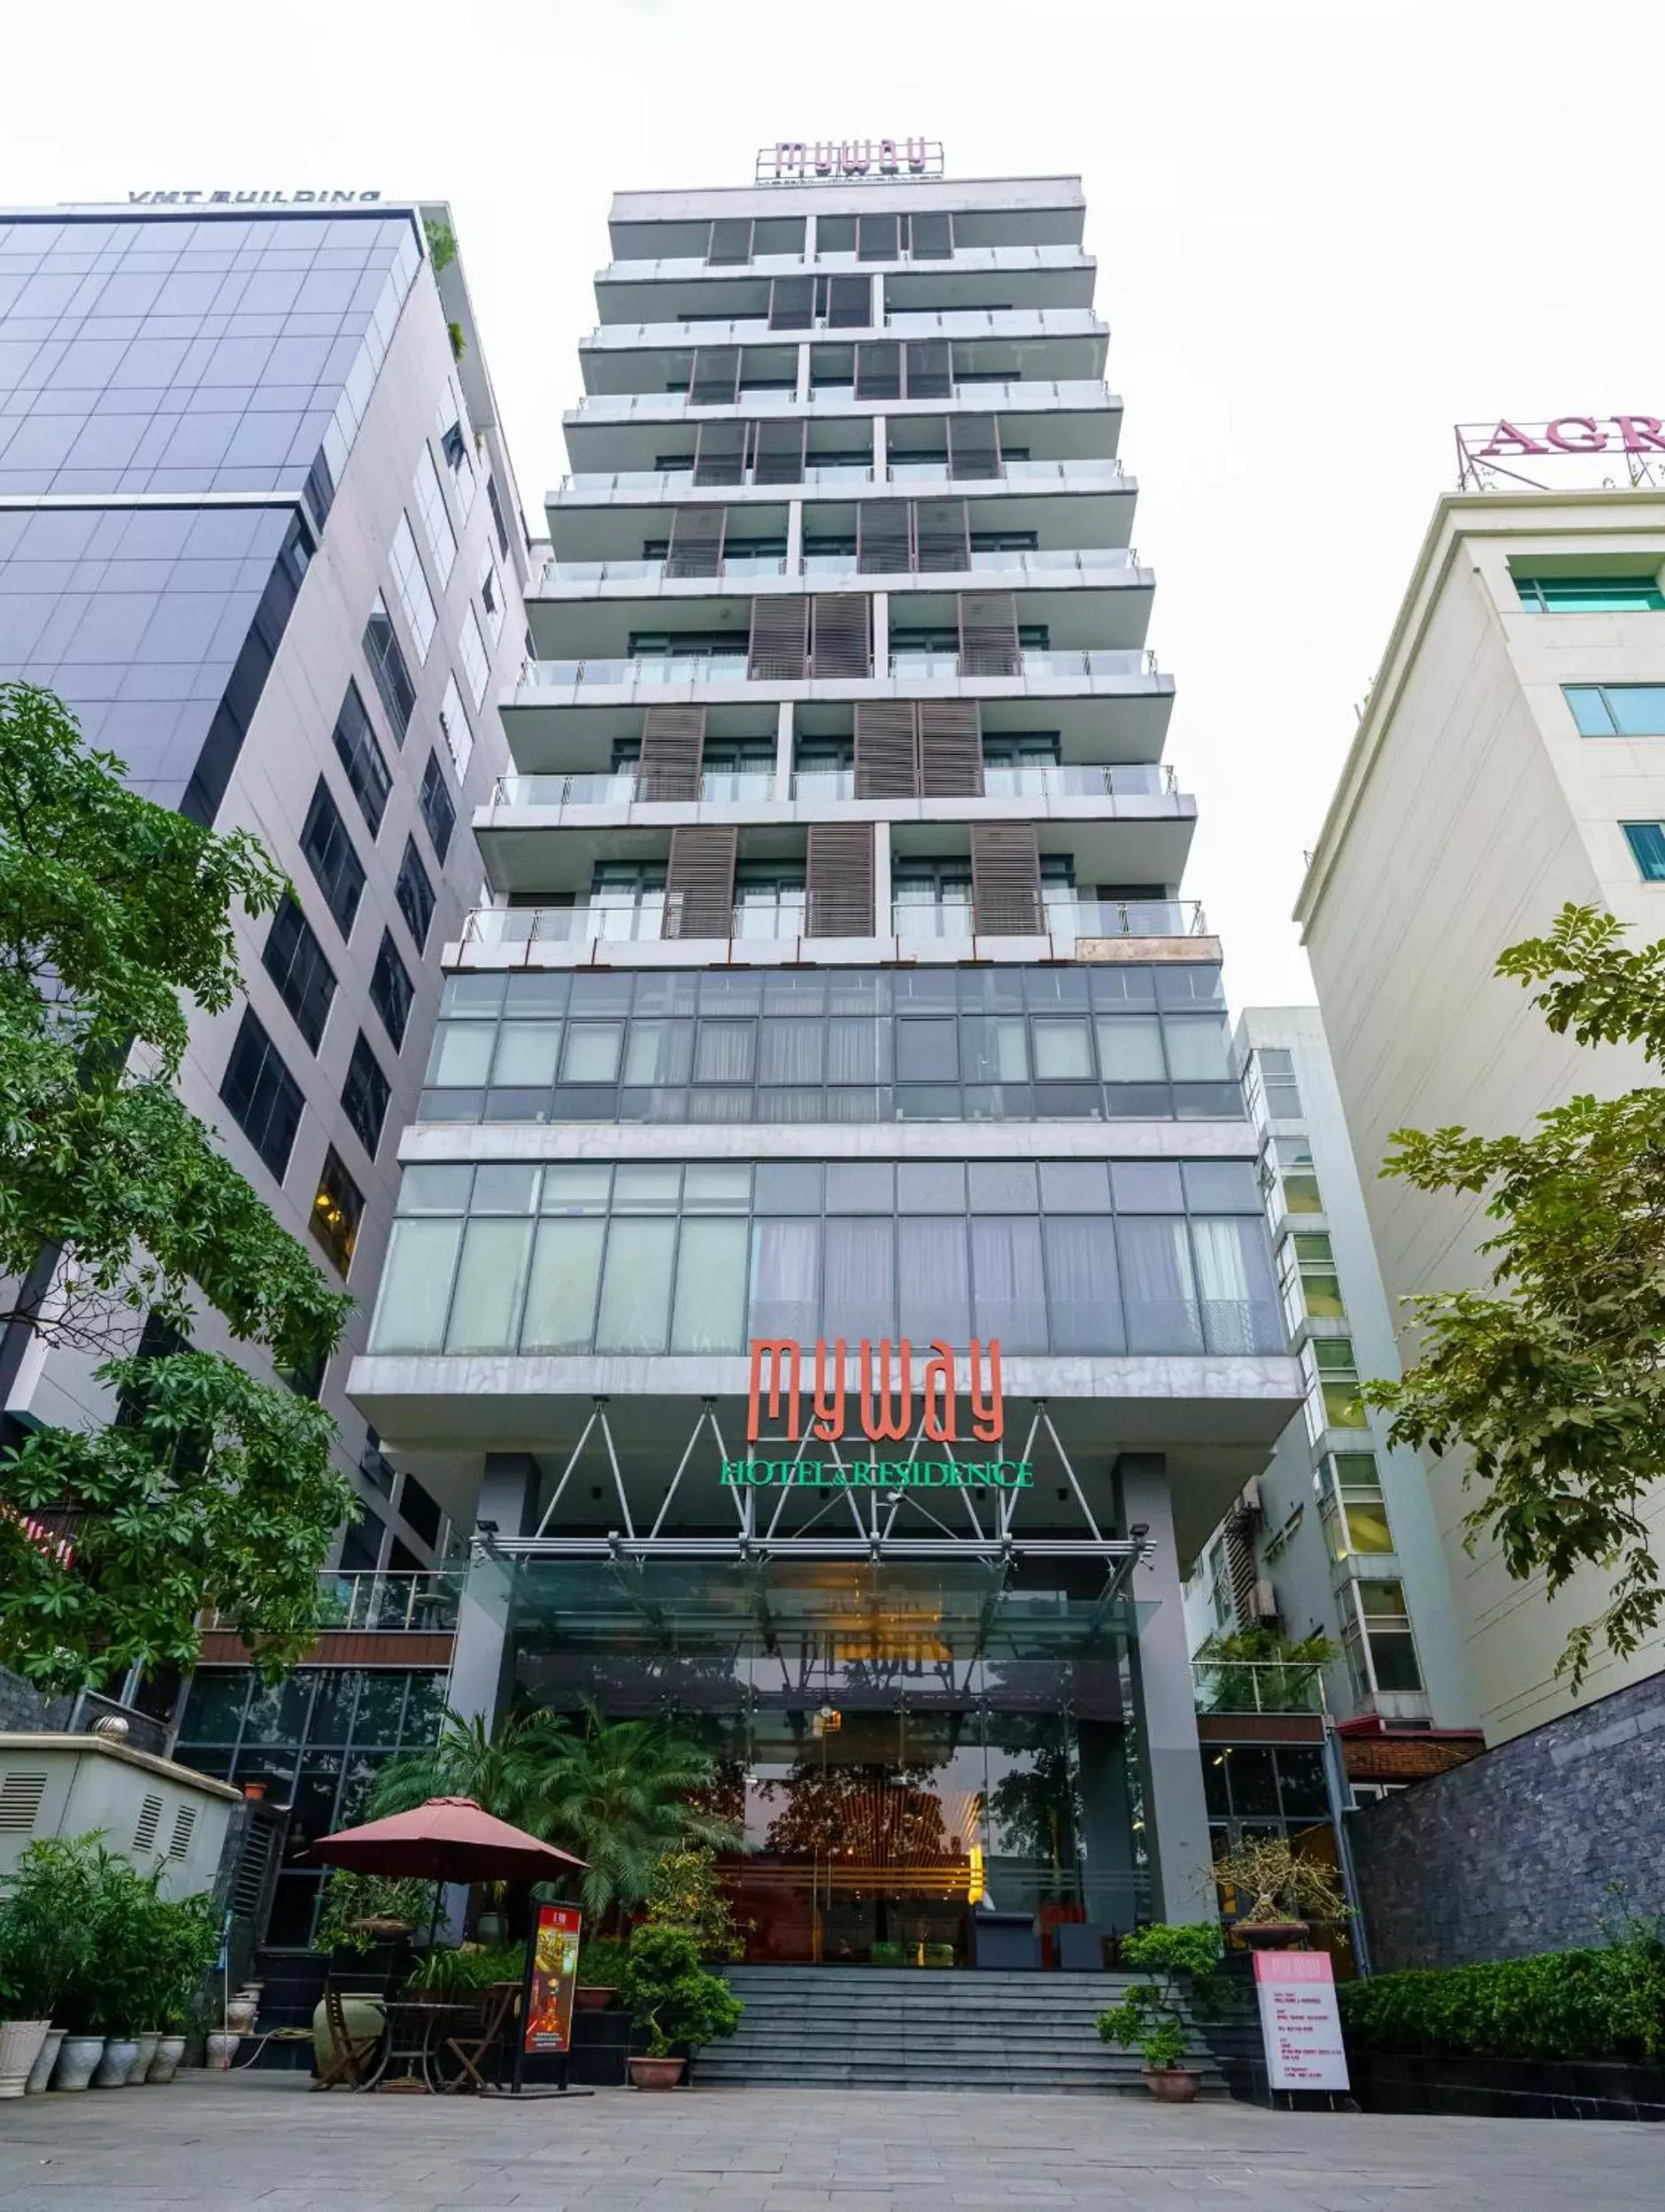 Off site, Property Building in My Way Hotel & Residence Ha Noi